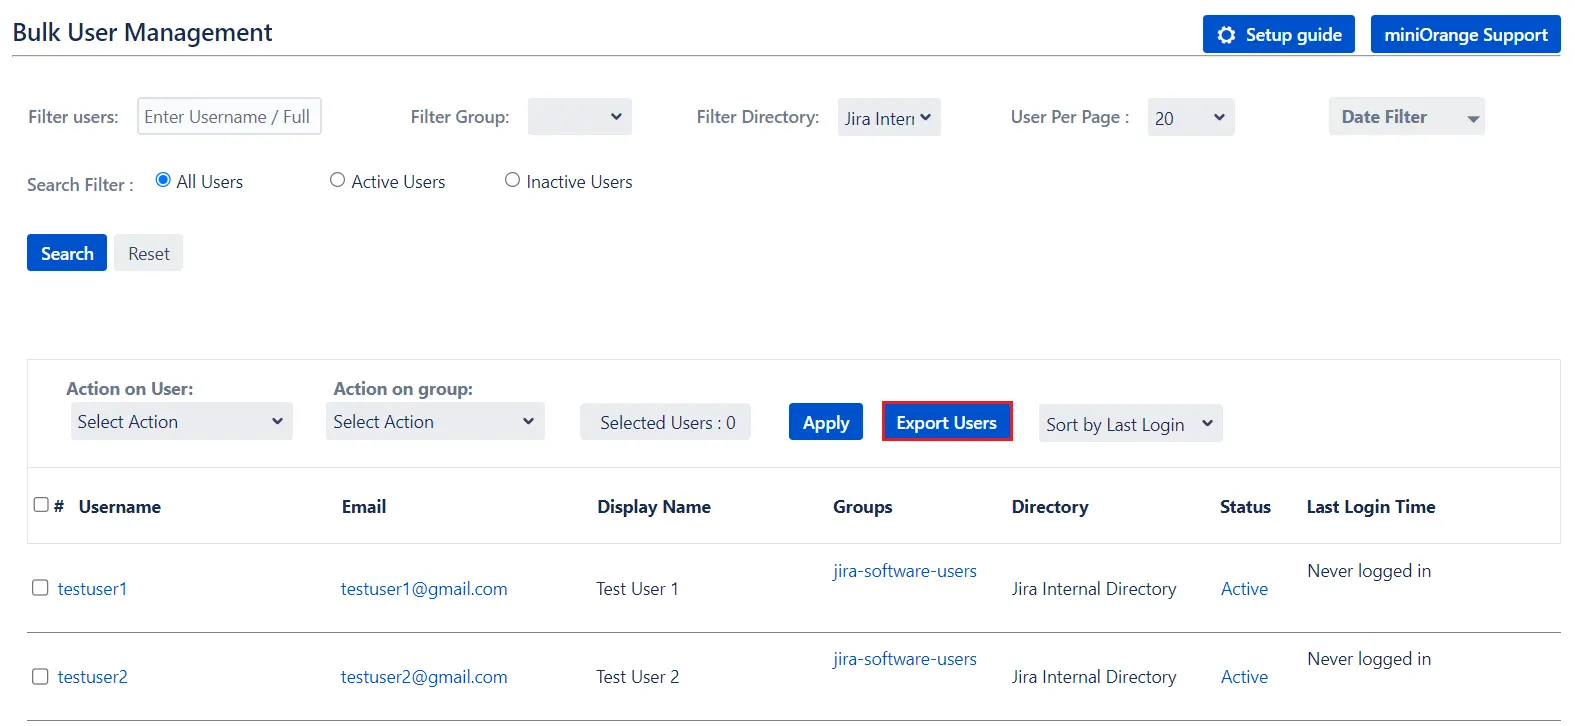 Setup Bulk User Management fo Jira, Bulk action management to inactivate deactivate users